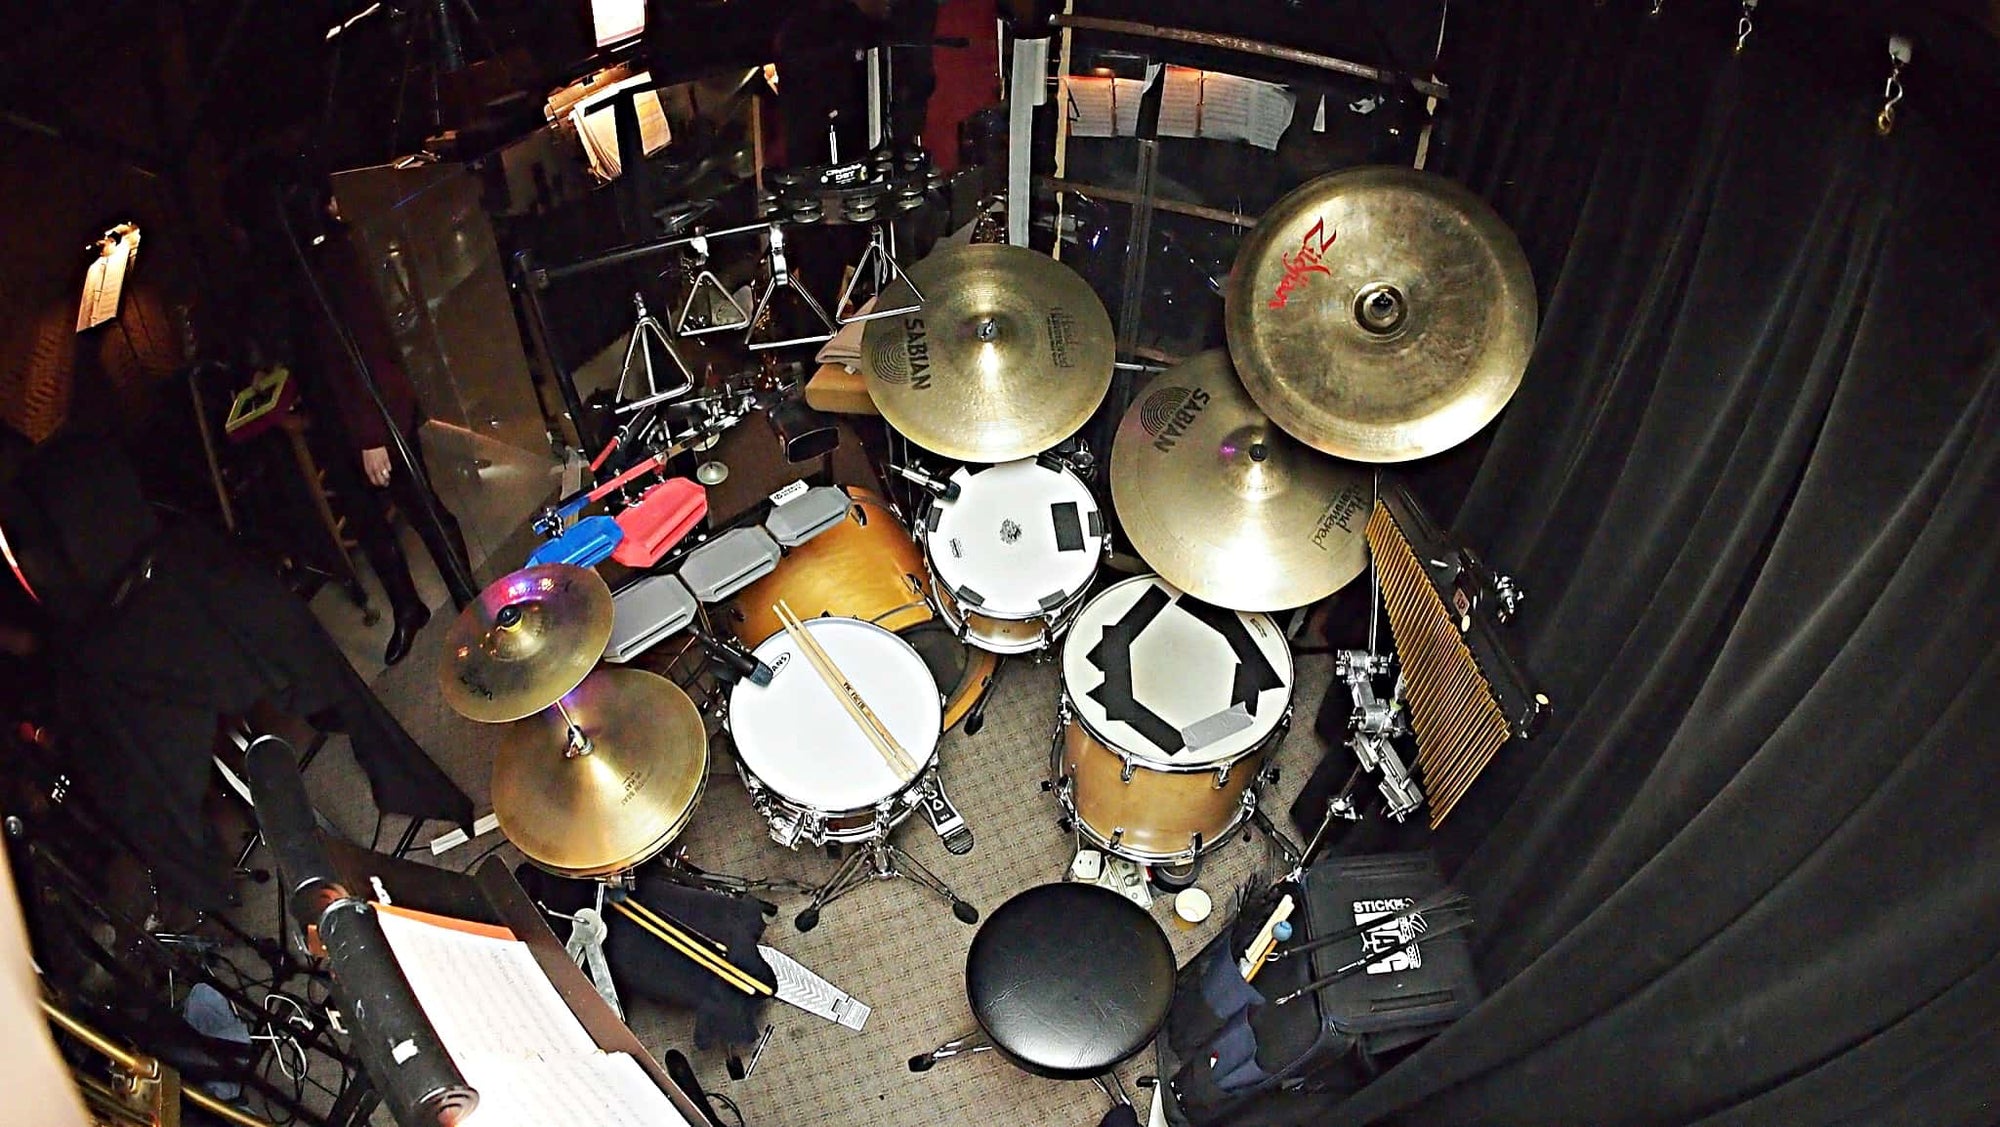 Chris Monroe's drum set setup for Mary Poppins at the Village Theatre in Everett, Washington.